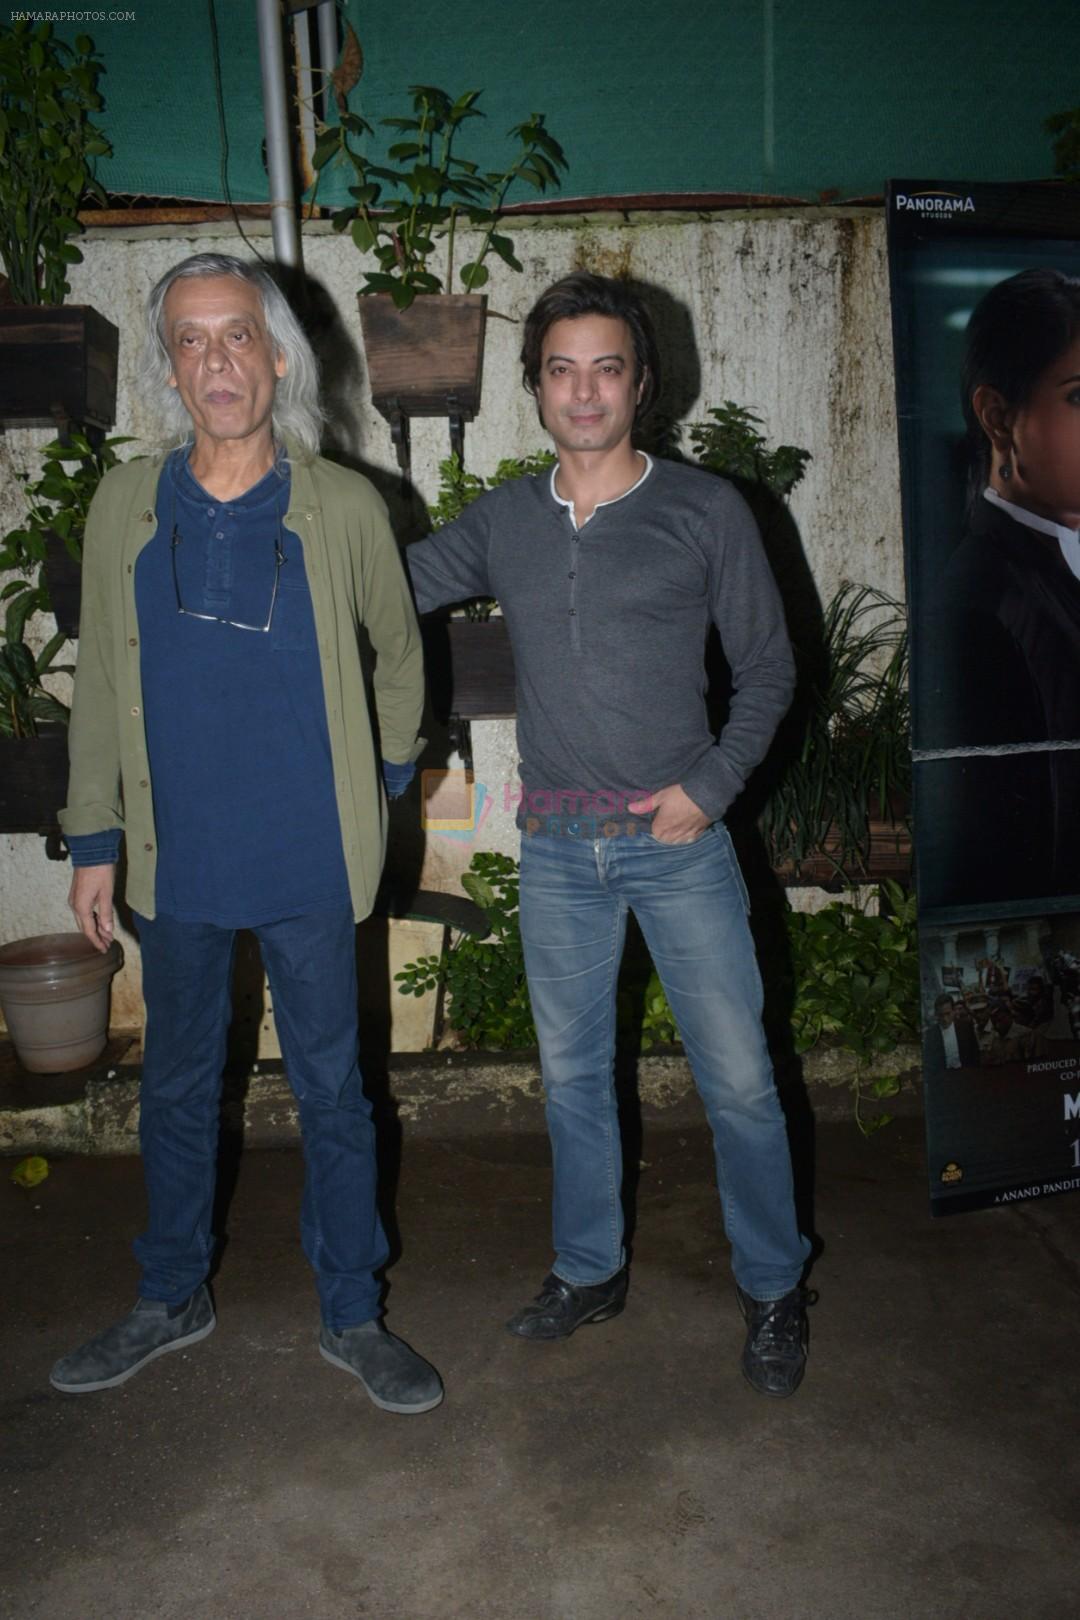 Sudhir Mishra at the Screening of Section 375 in Sunny Sound juhu on 12th Sept 2019